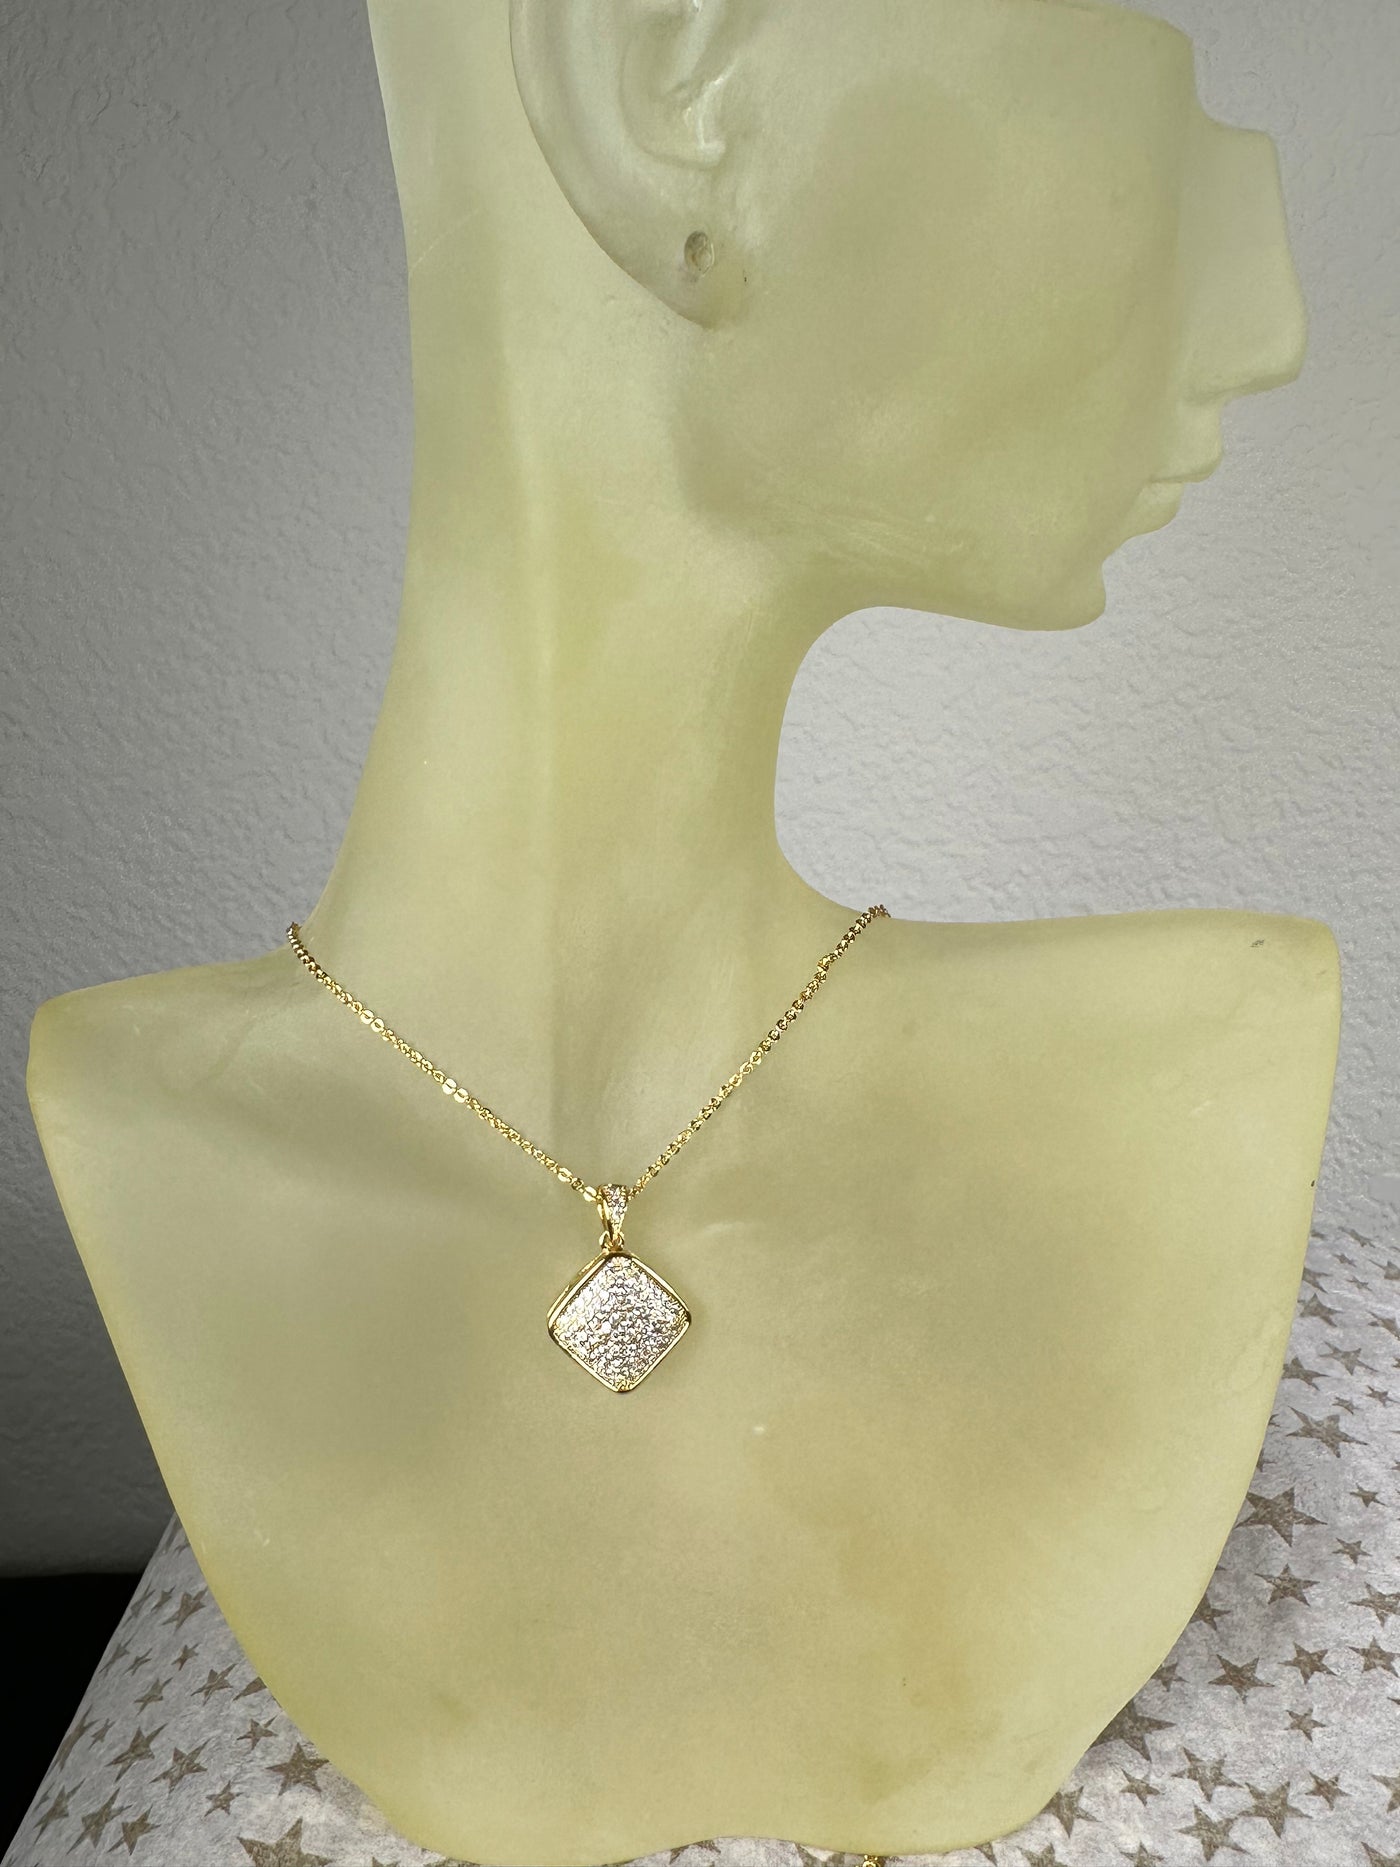 Pave Set Cubic Zirconia Square Pendant Necklace in Yellow Gold Tone